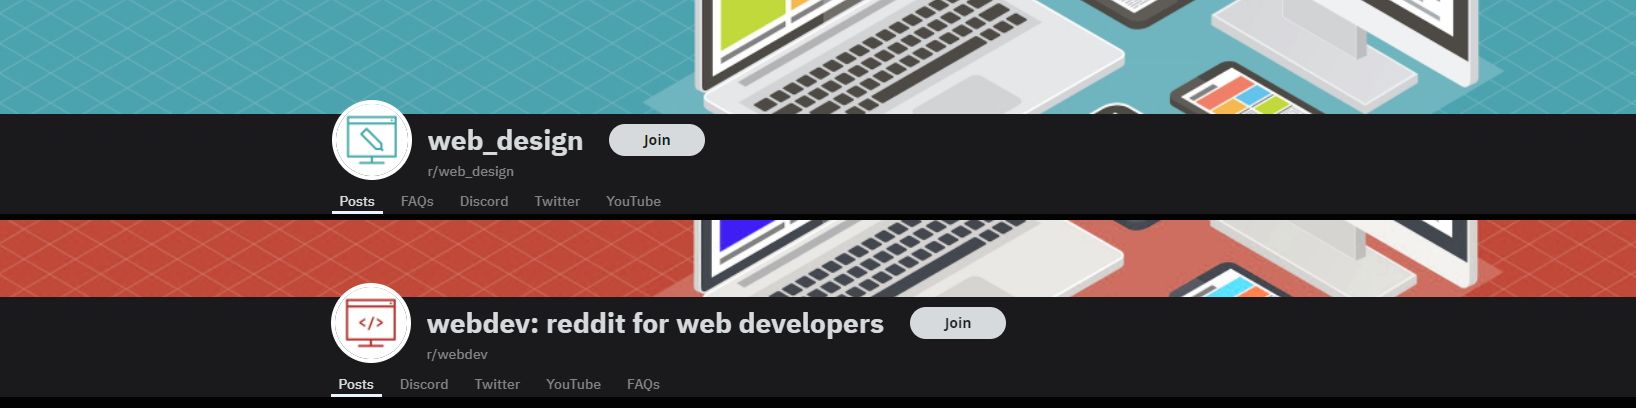 A Screenshot of r/web_design and r/webdev's Banners